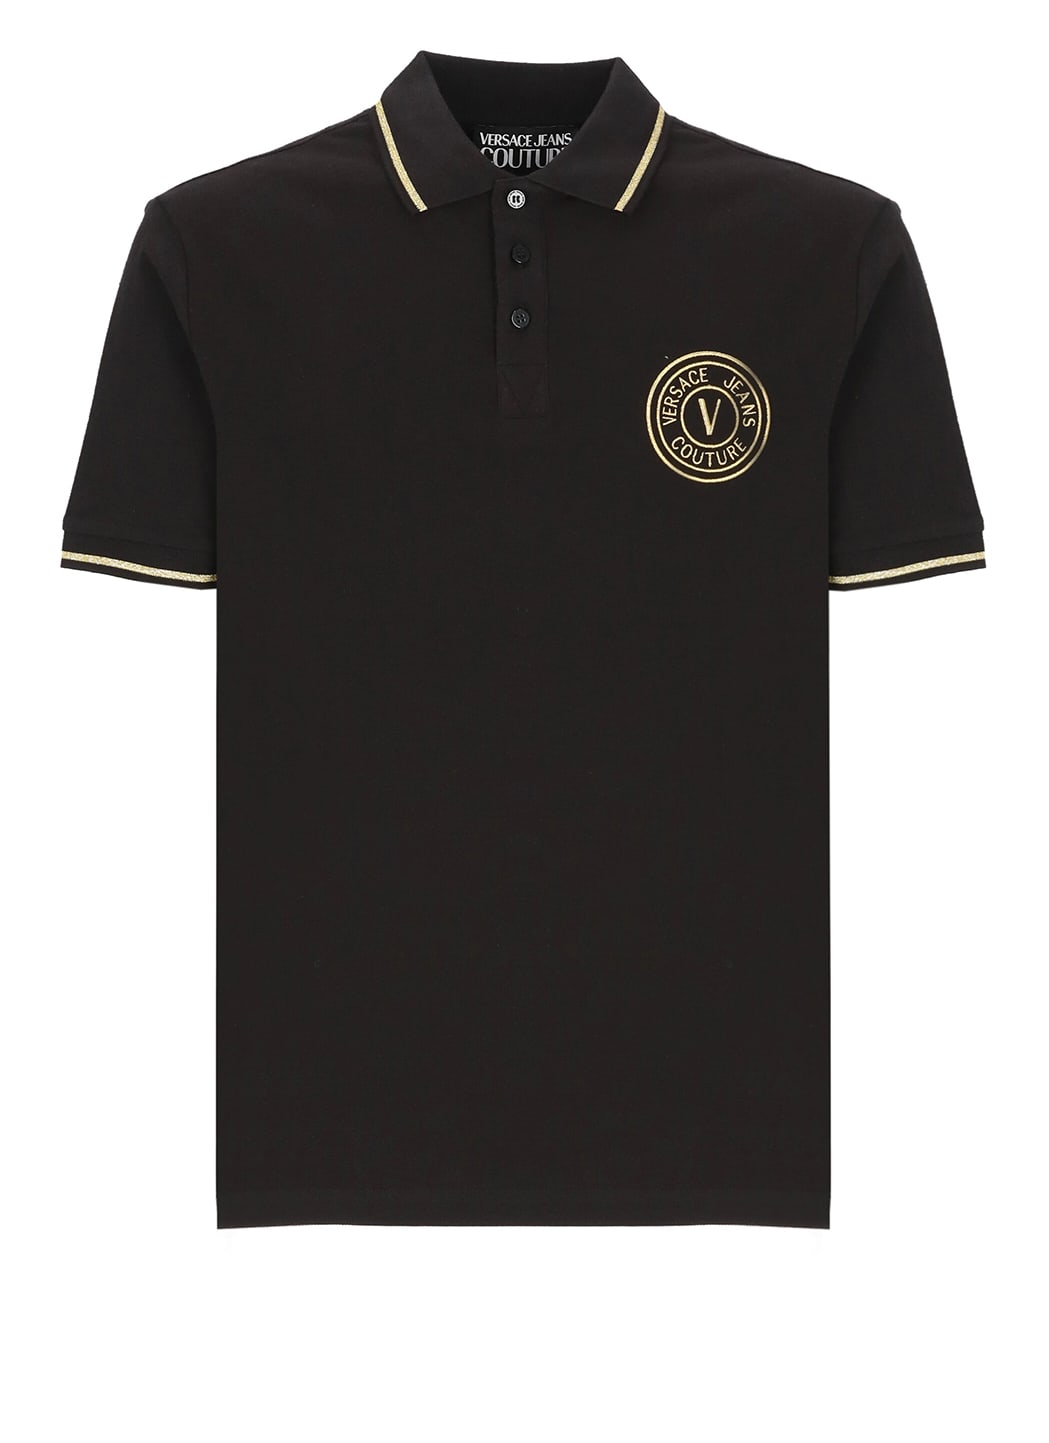 VERSACE JEANS COUTURE POLO SHIRT WITH VEMBLEM LOGO